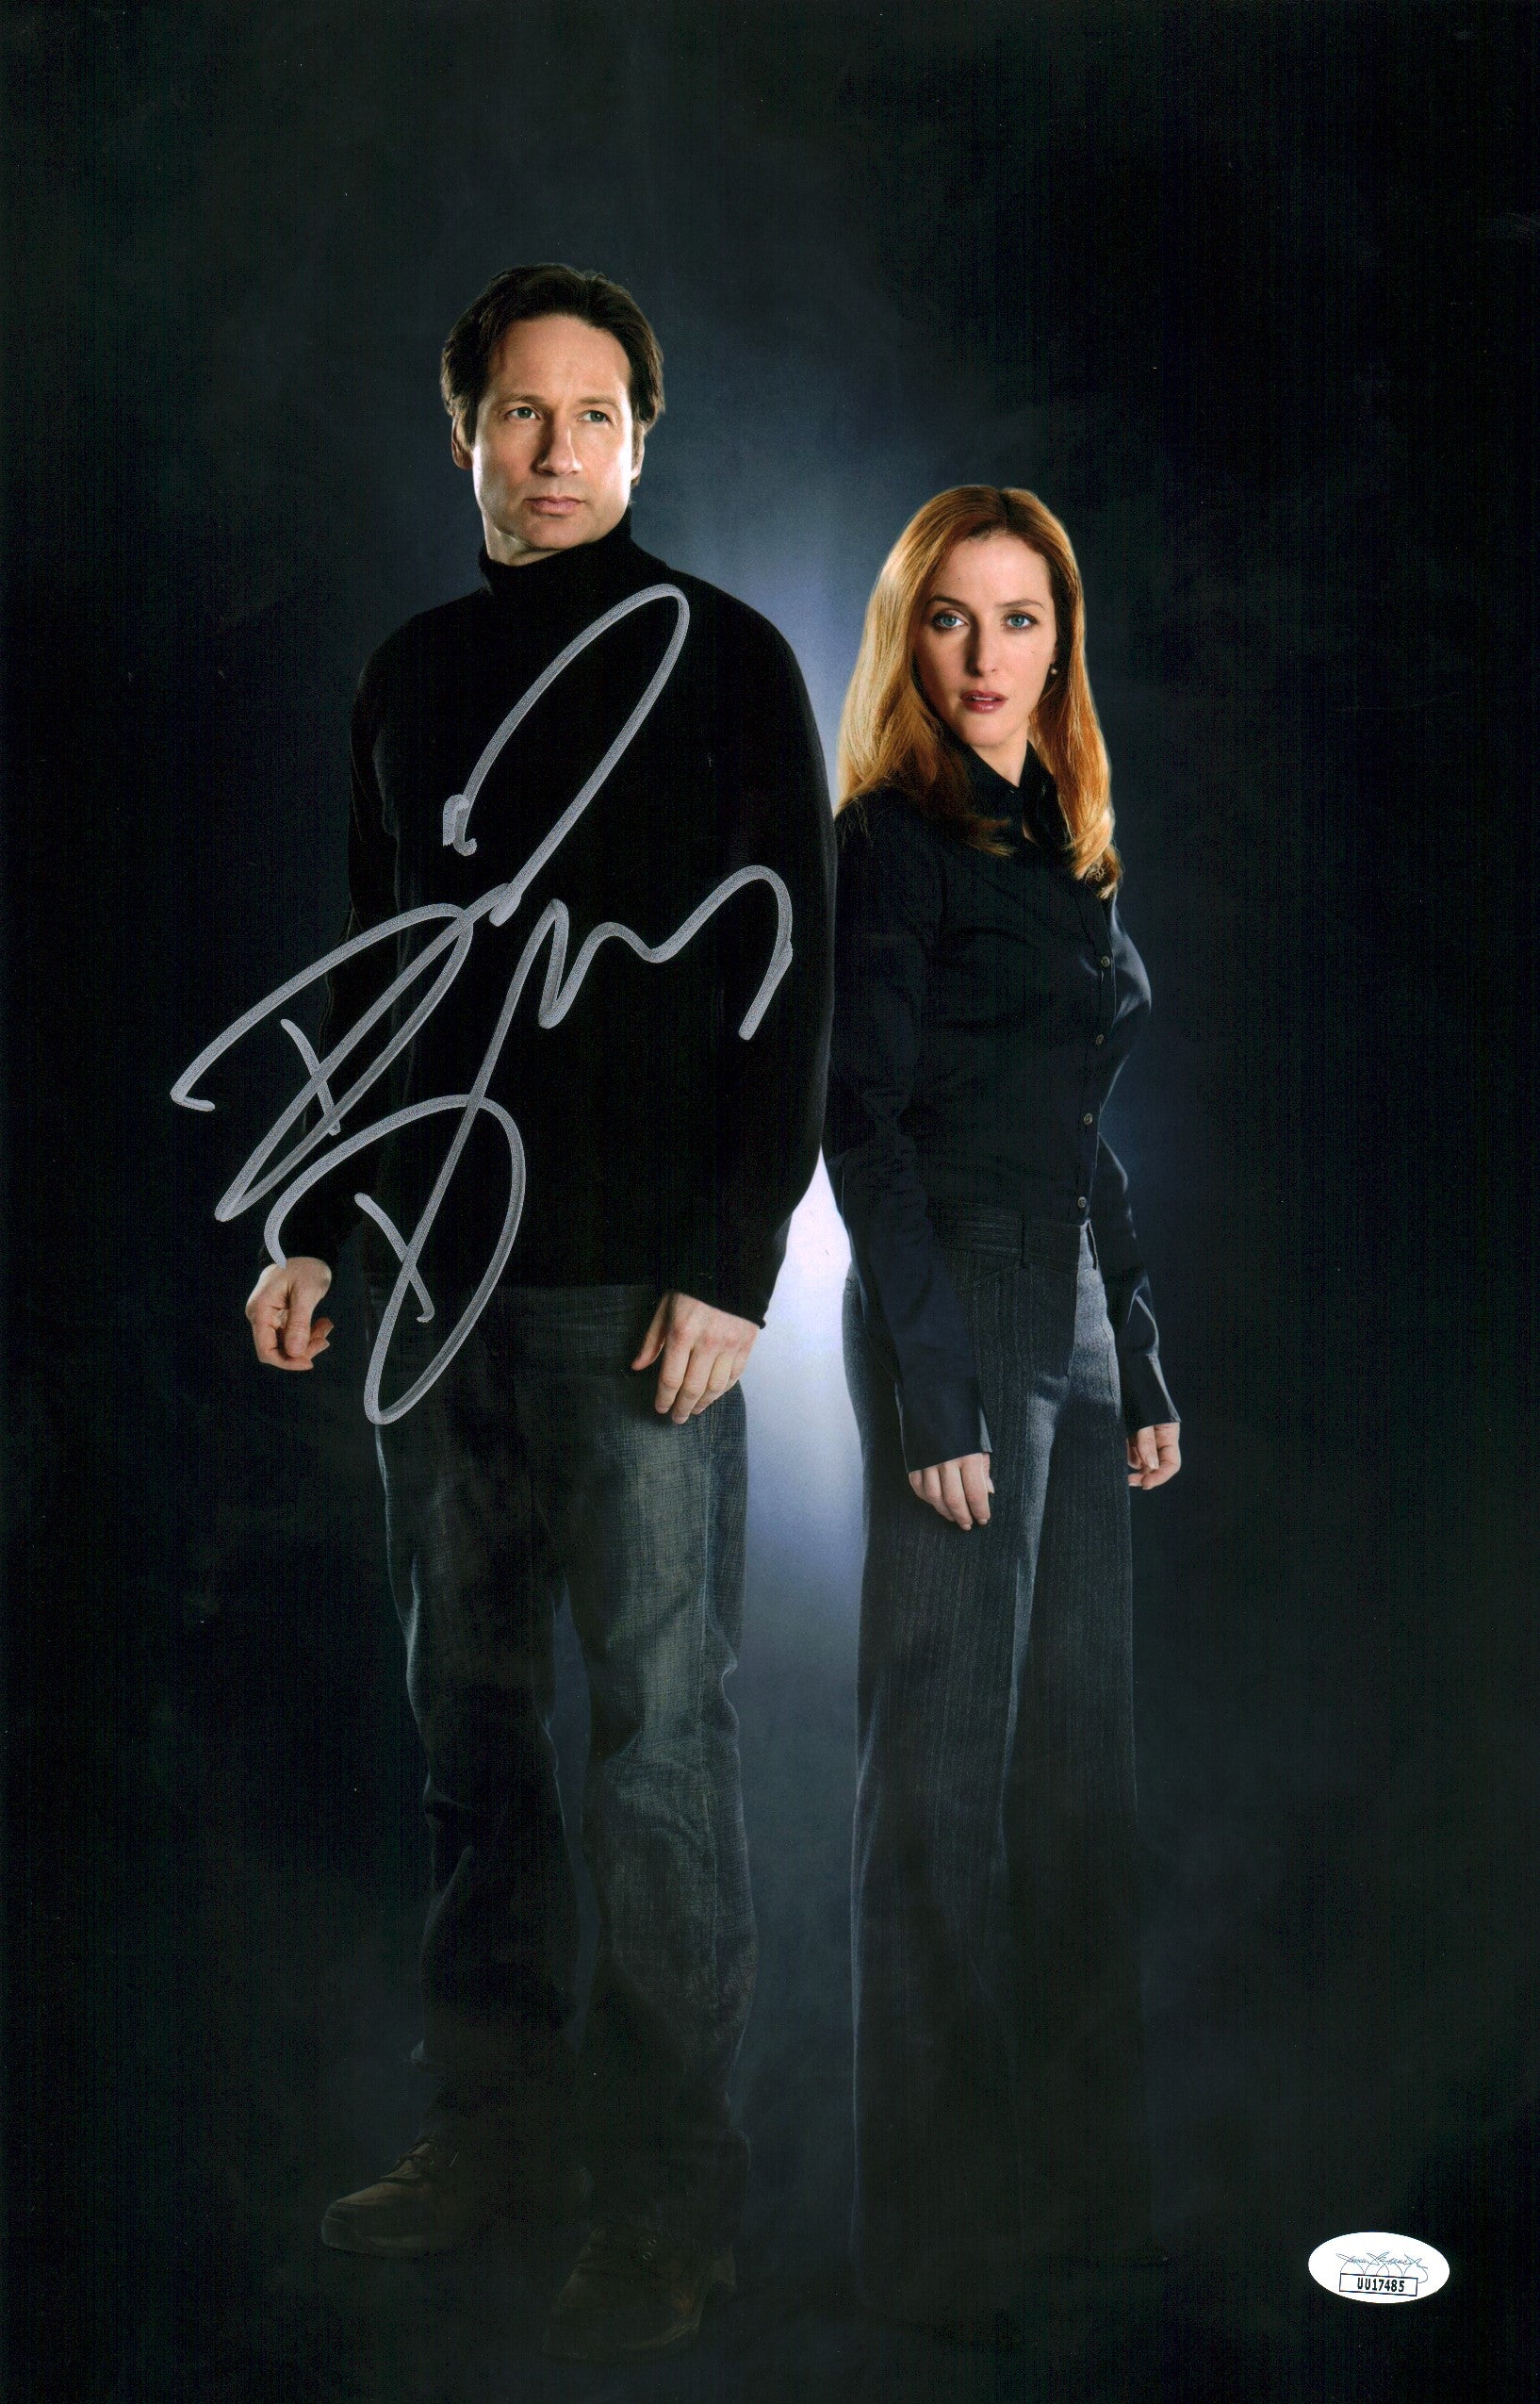 David Duchovny The X Files 11x17 Signed Photo Poster JSA COA Certified Autograph